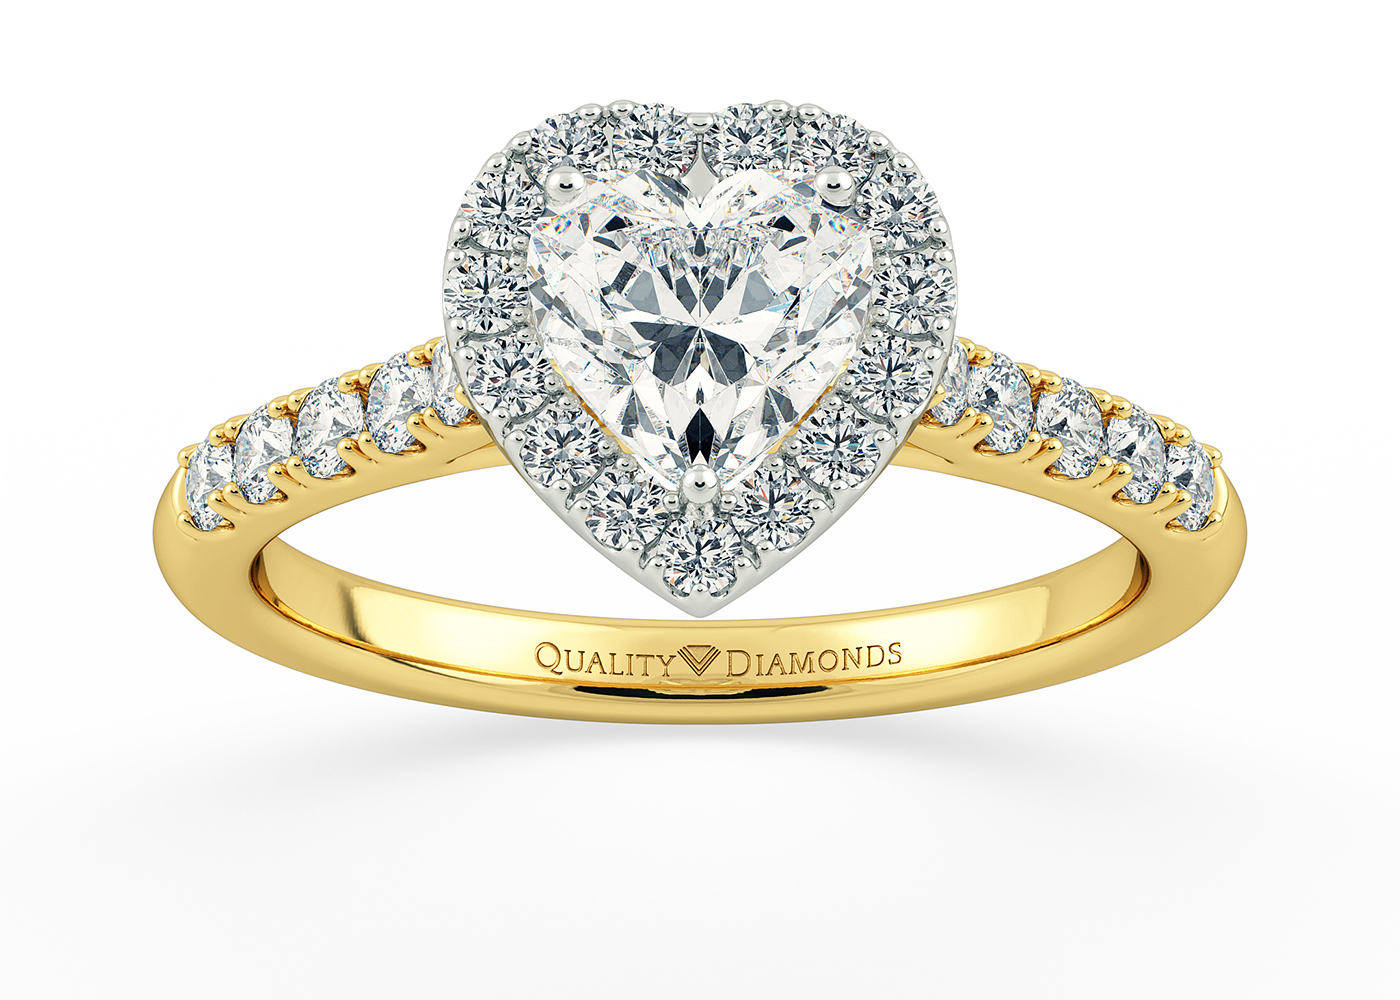 Two Carat Halo Heart Diamond Ring in 18K Yellow Gold